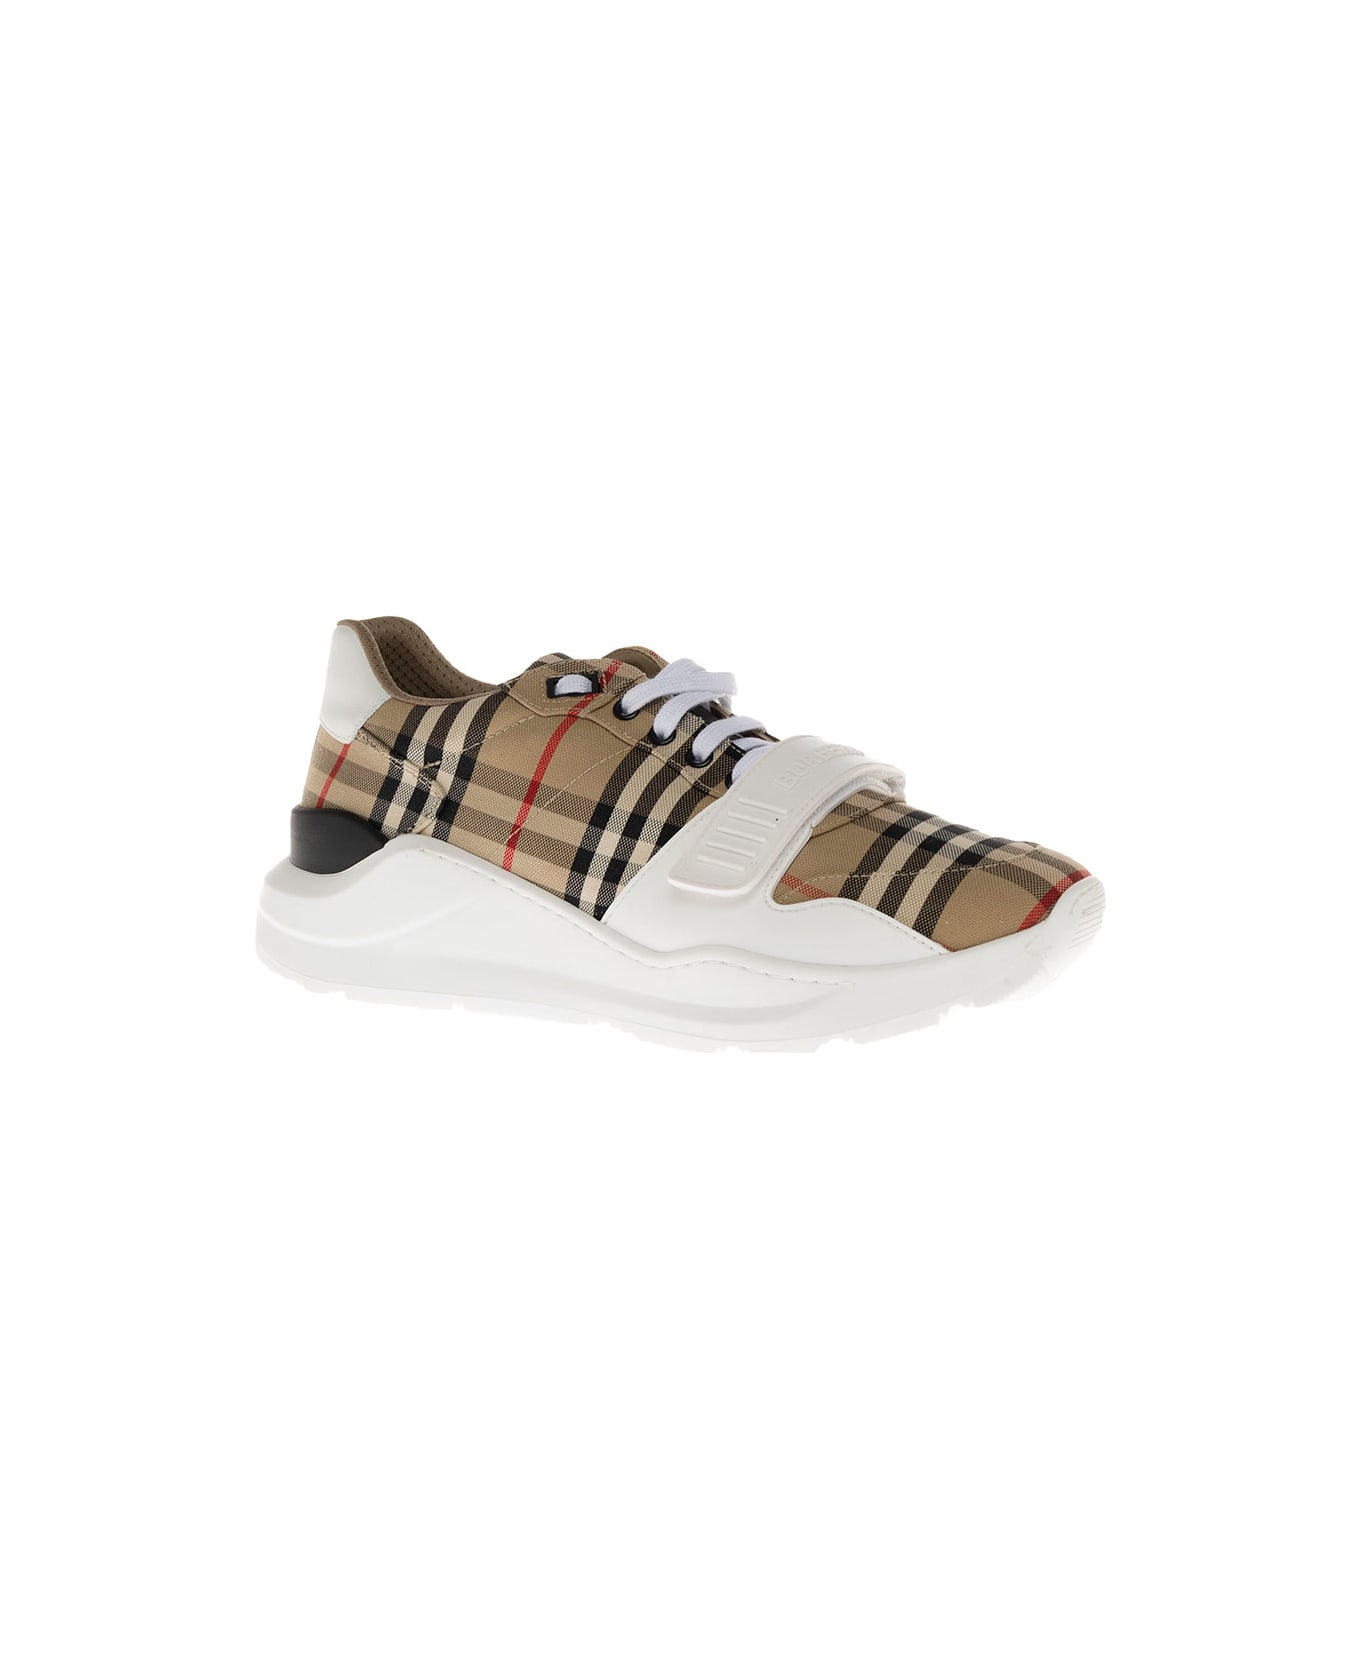 Burberry Vintage Check Fabric Sneakers Man Burberry - Beige